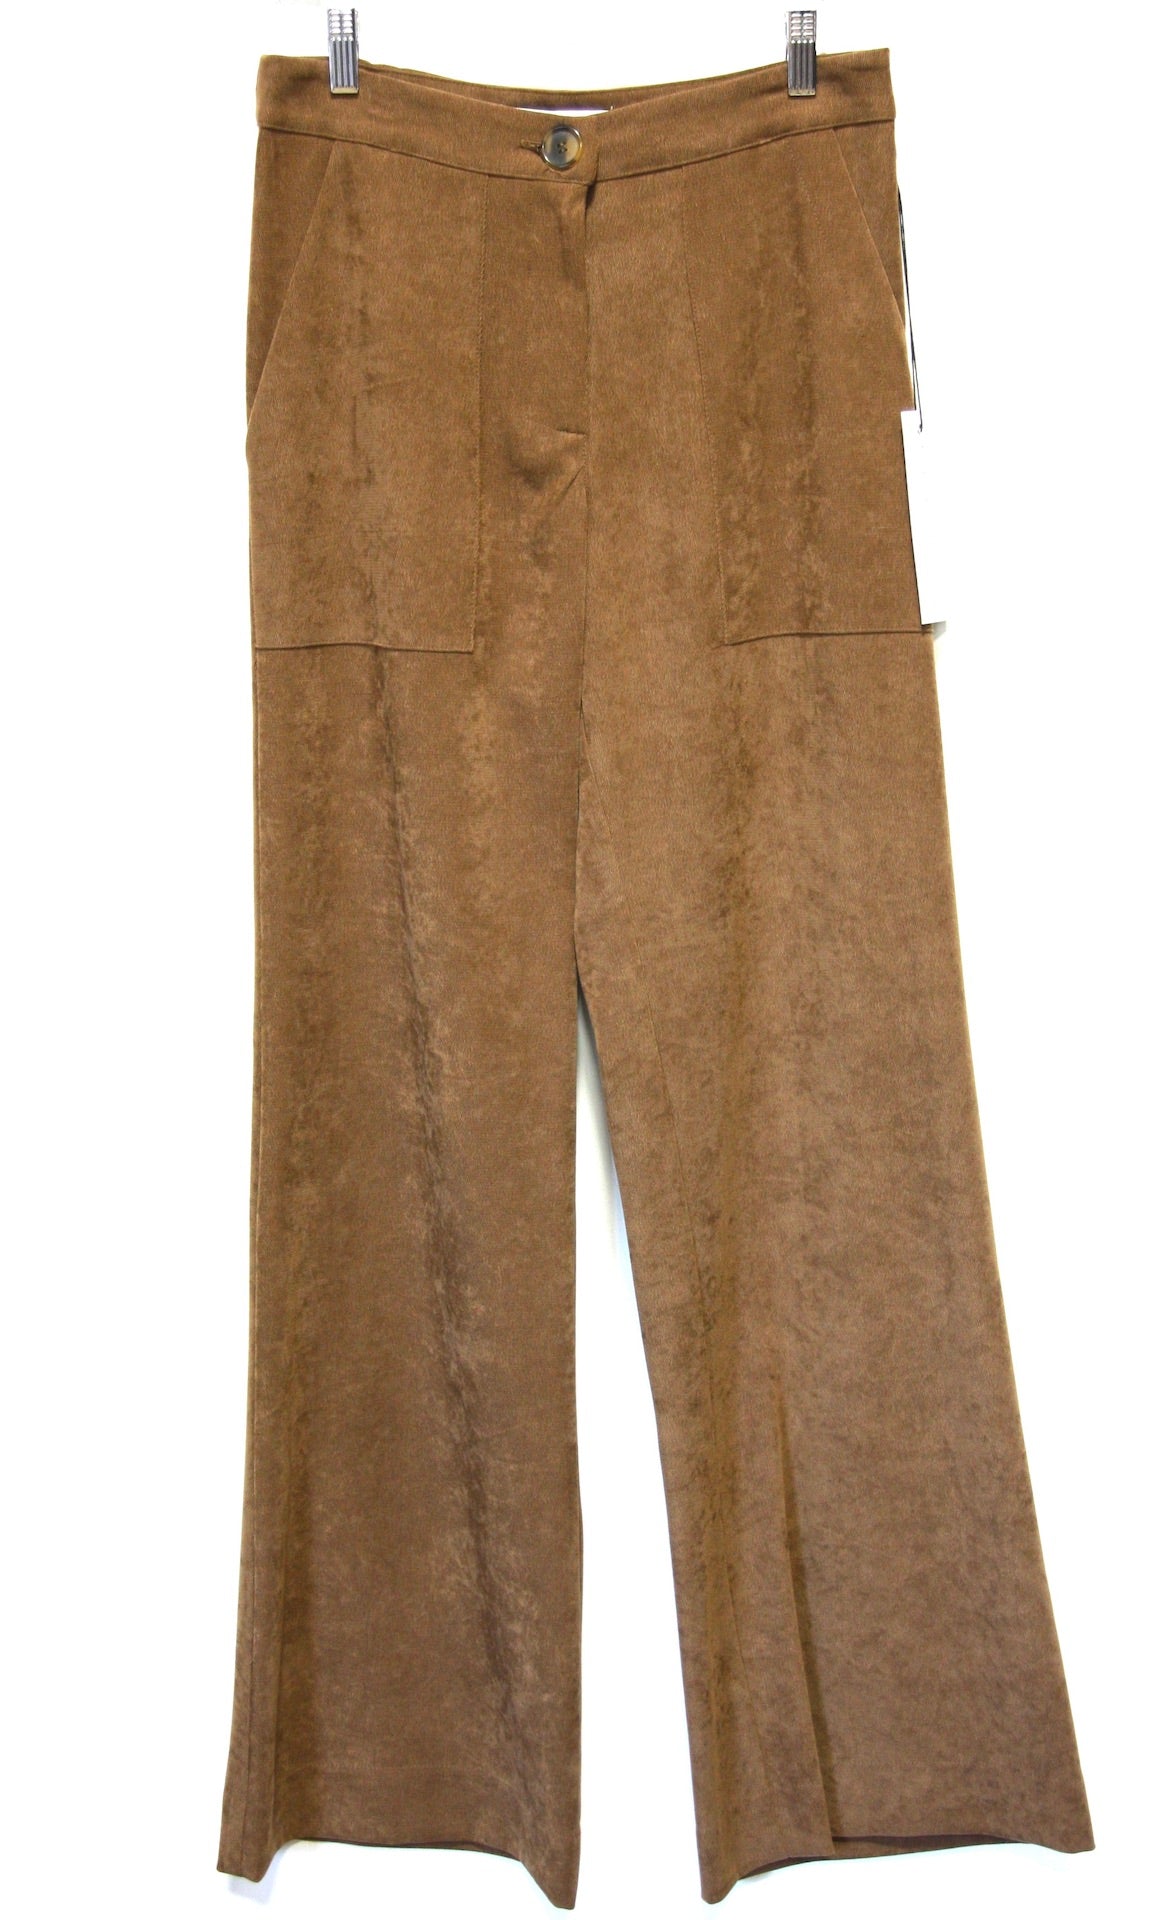 SS269 - 8 - Bloodfool Pant - Sepia